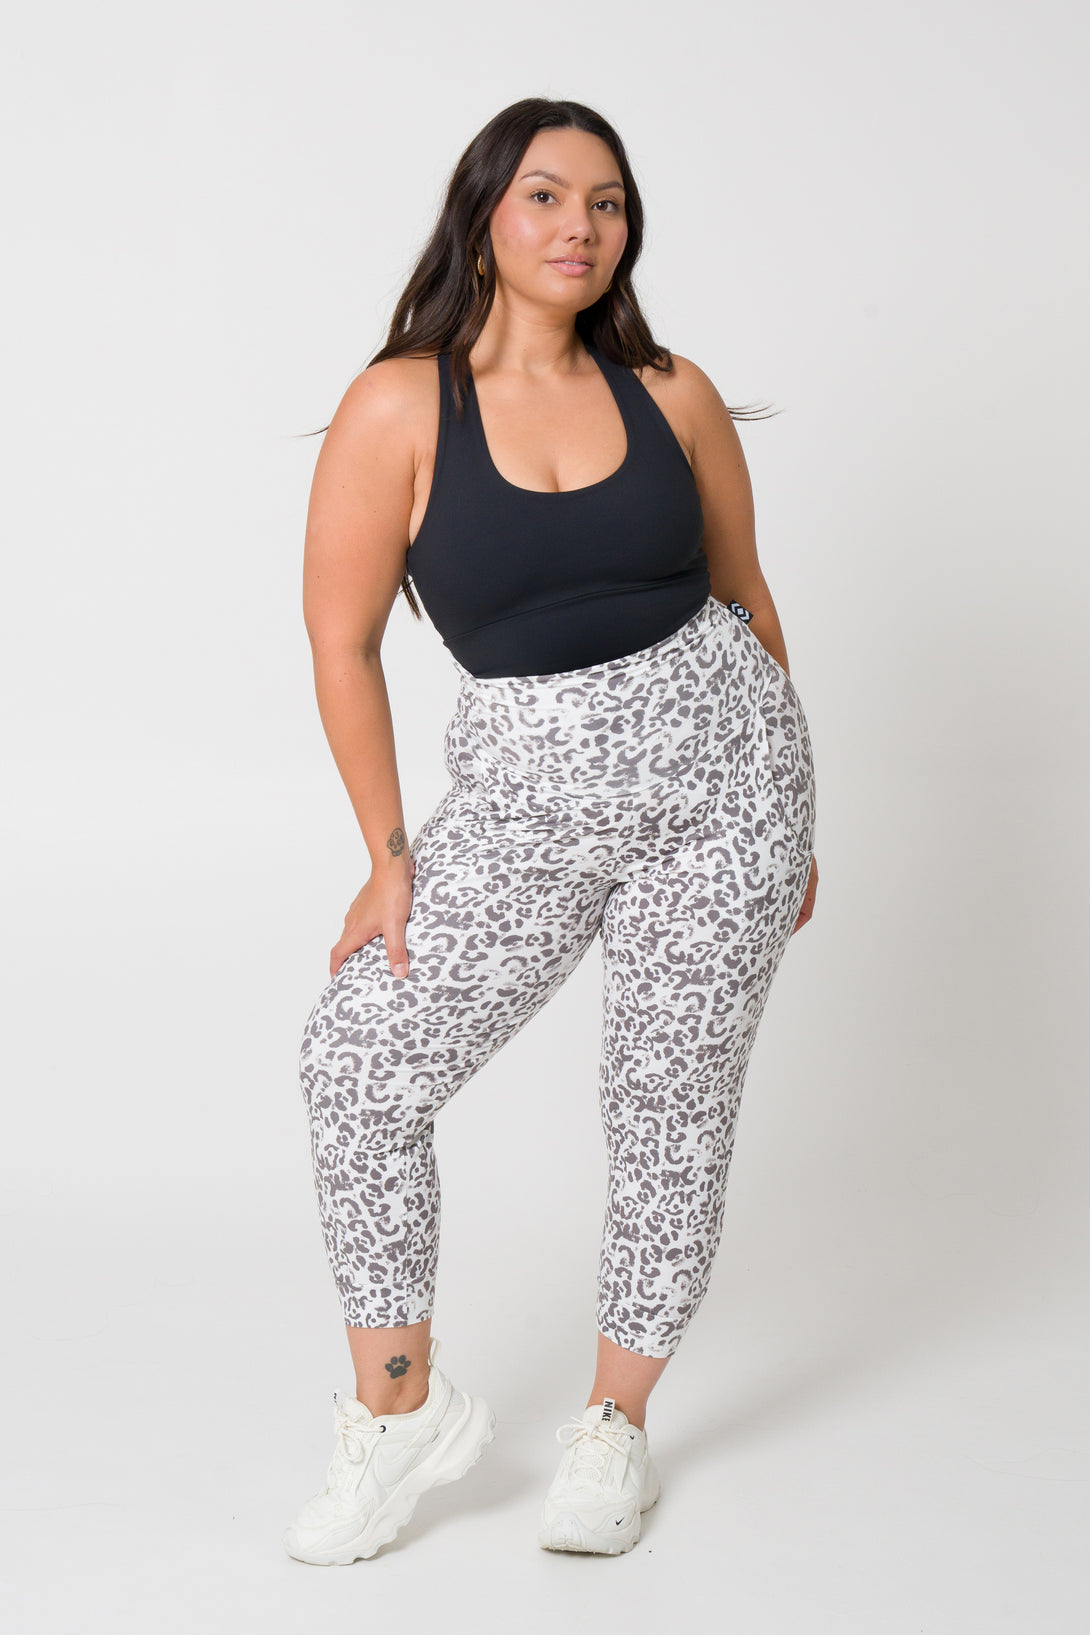 Snow Jag Soft to Touch - Jogger Capris w/ Pockets - Exoticathletica